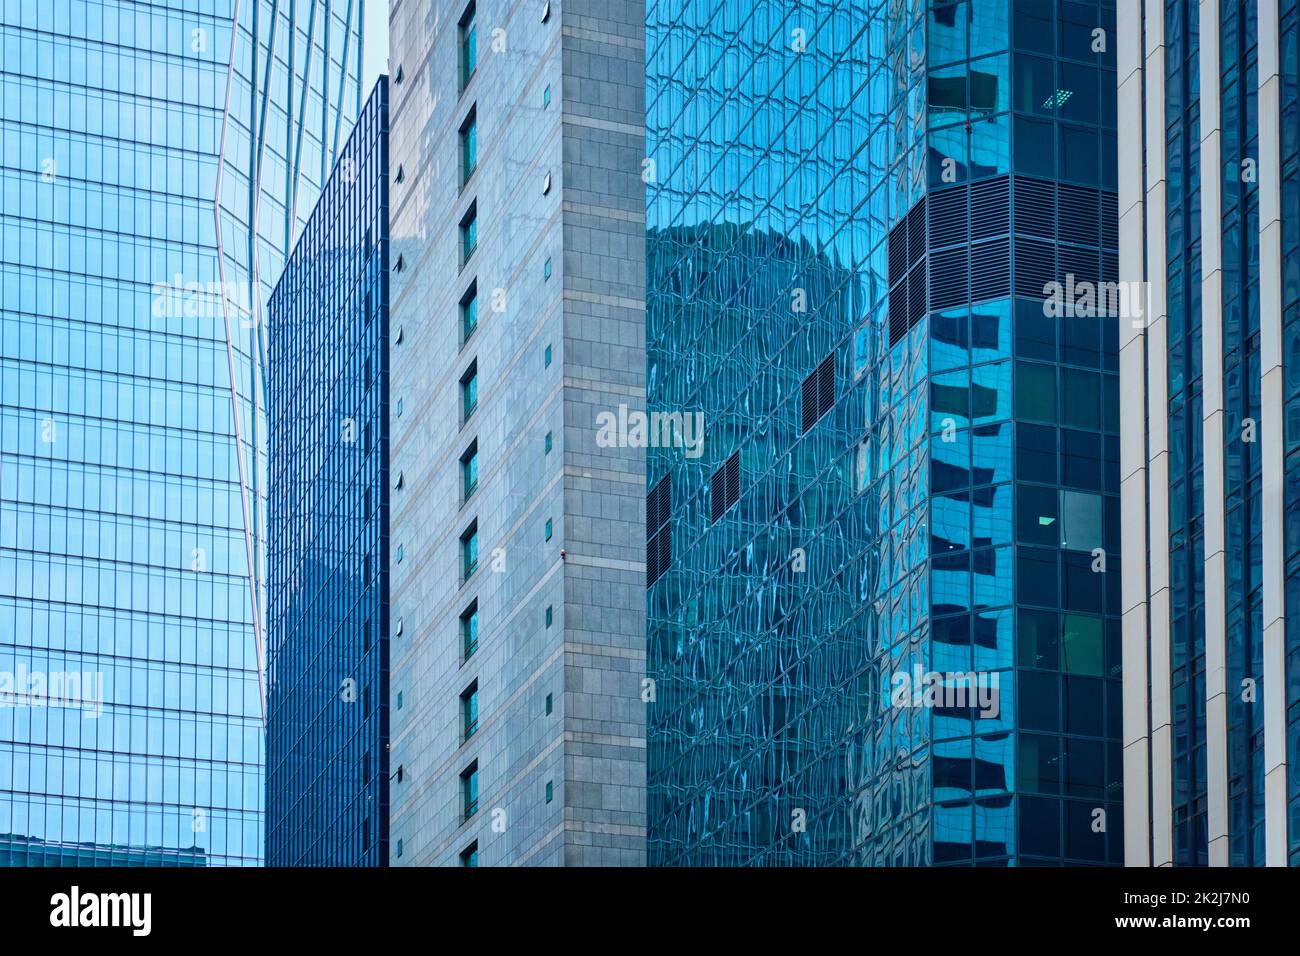 Skyscrapers high rise buildings close up Stock Photo